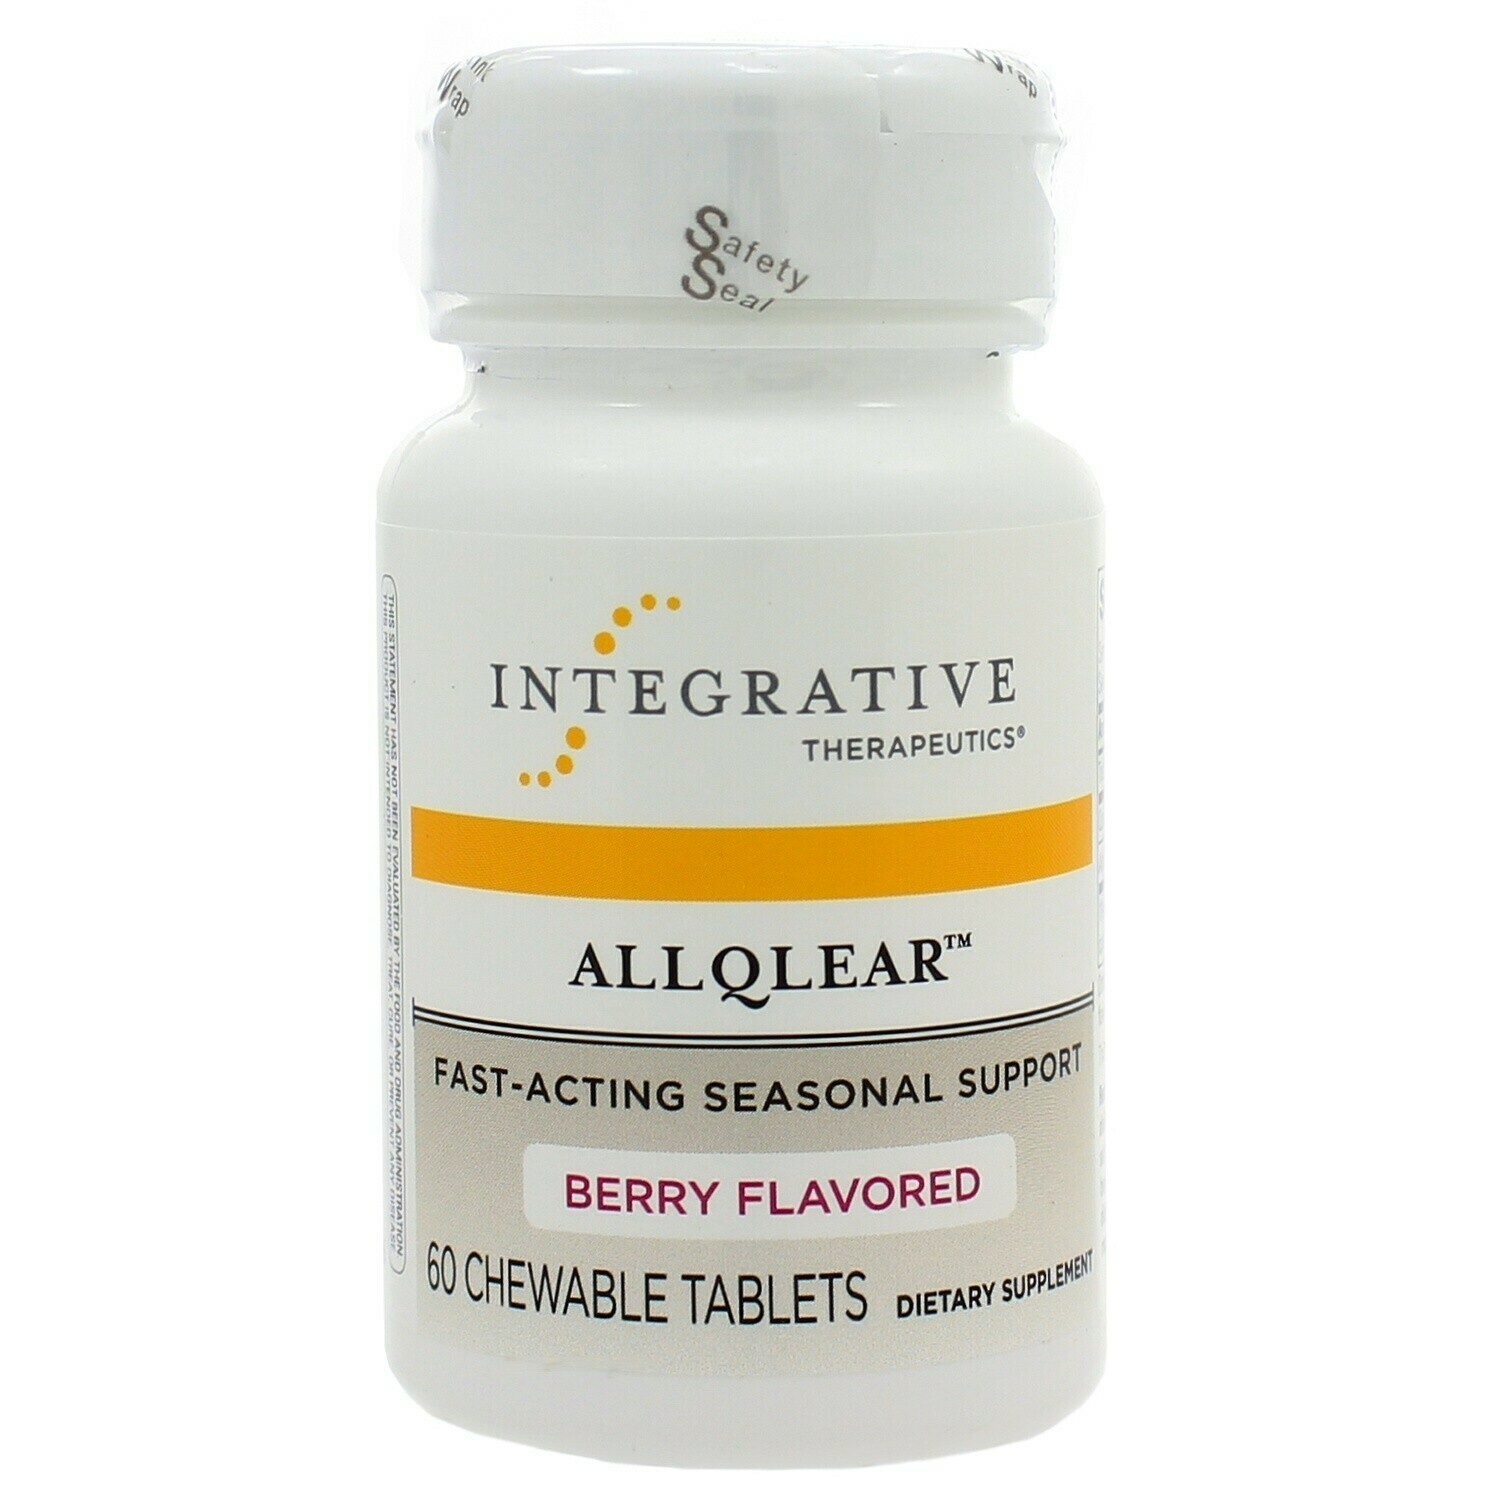 AllQlear Chewable 60 Tablets